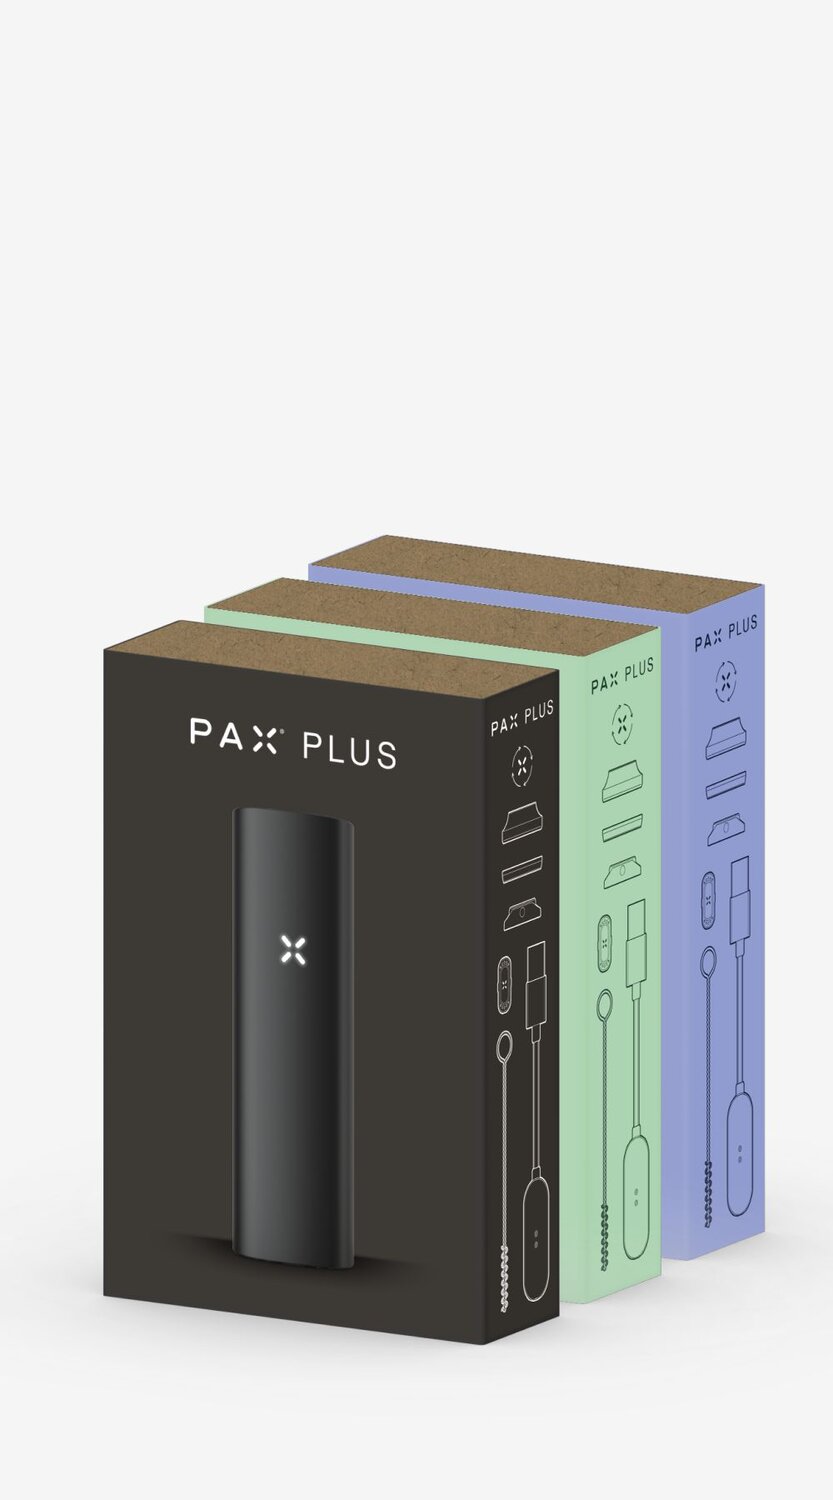 PAX PLUS, now with more options!